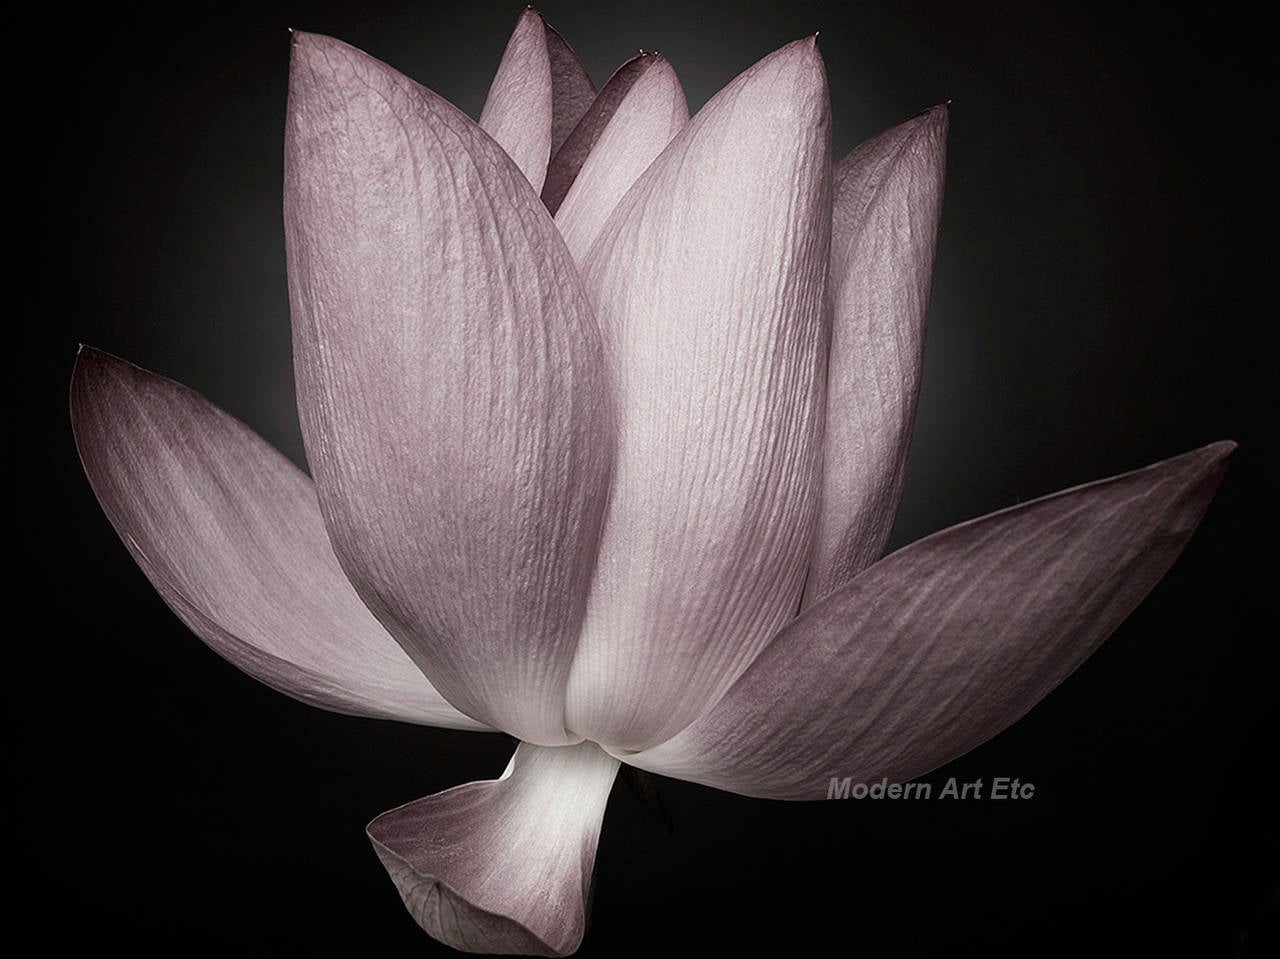 M.V. Black and White Photograph - Photography - Flower Series - Matted, ready to frame